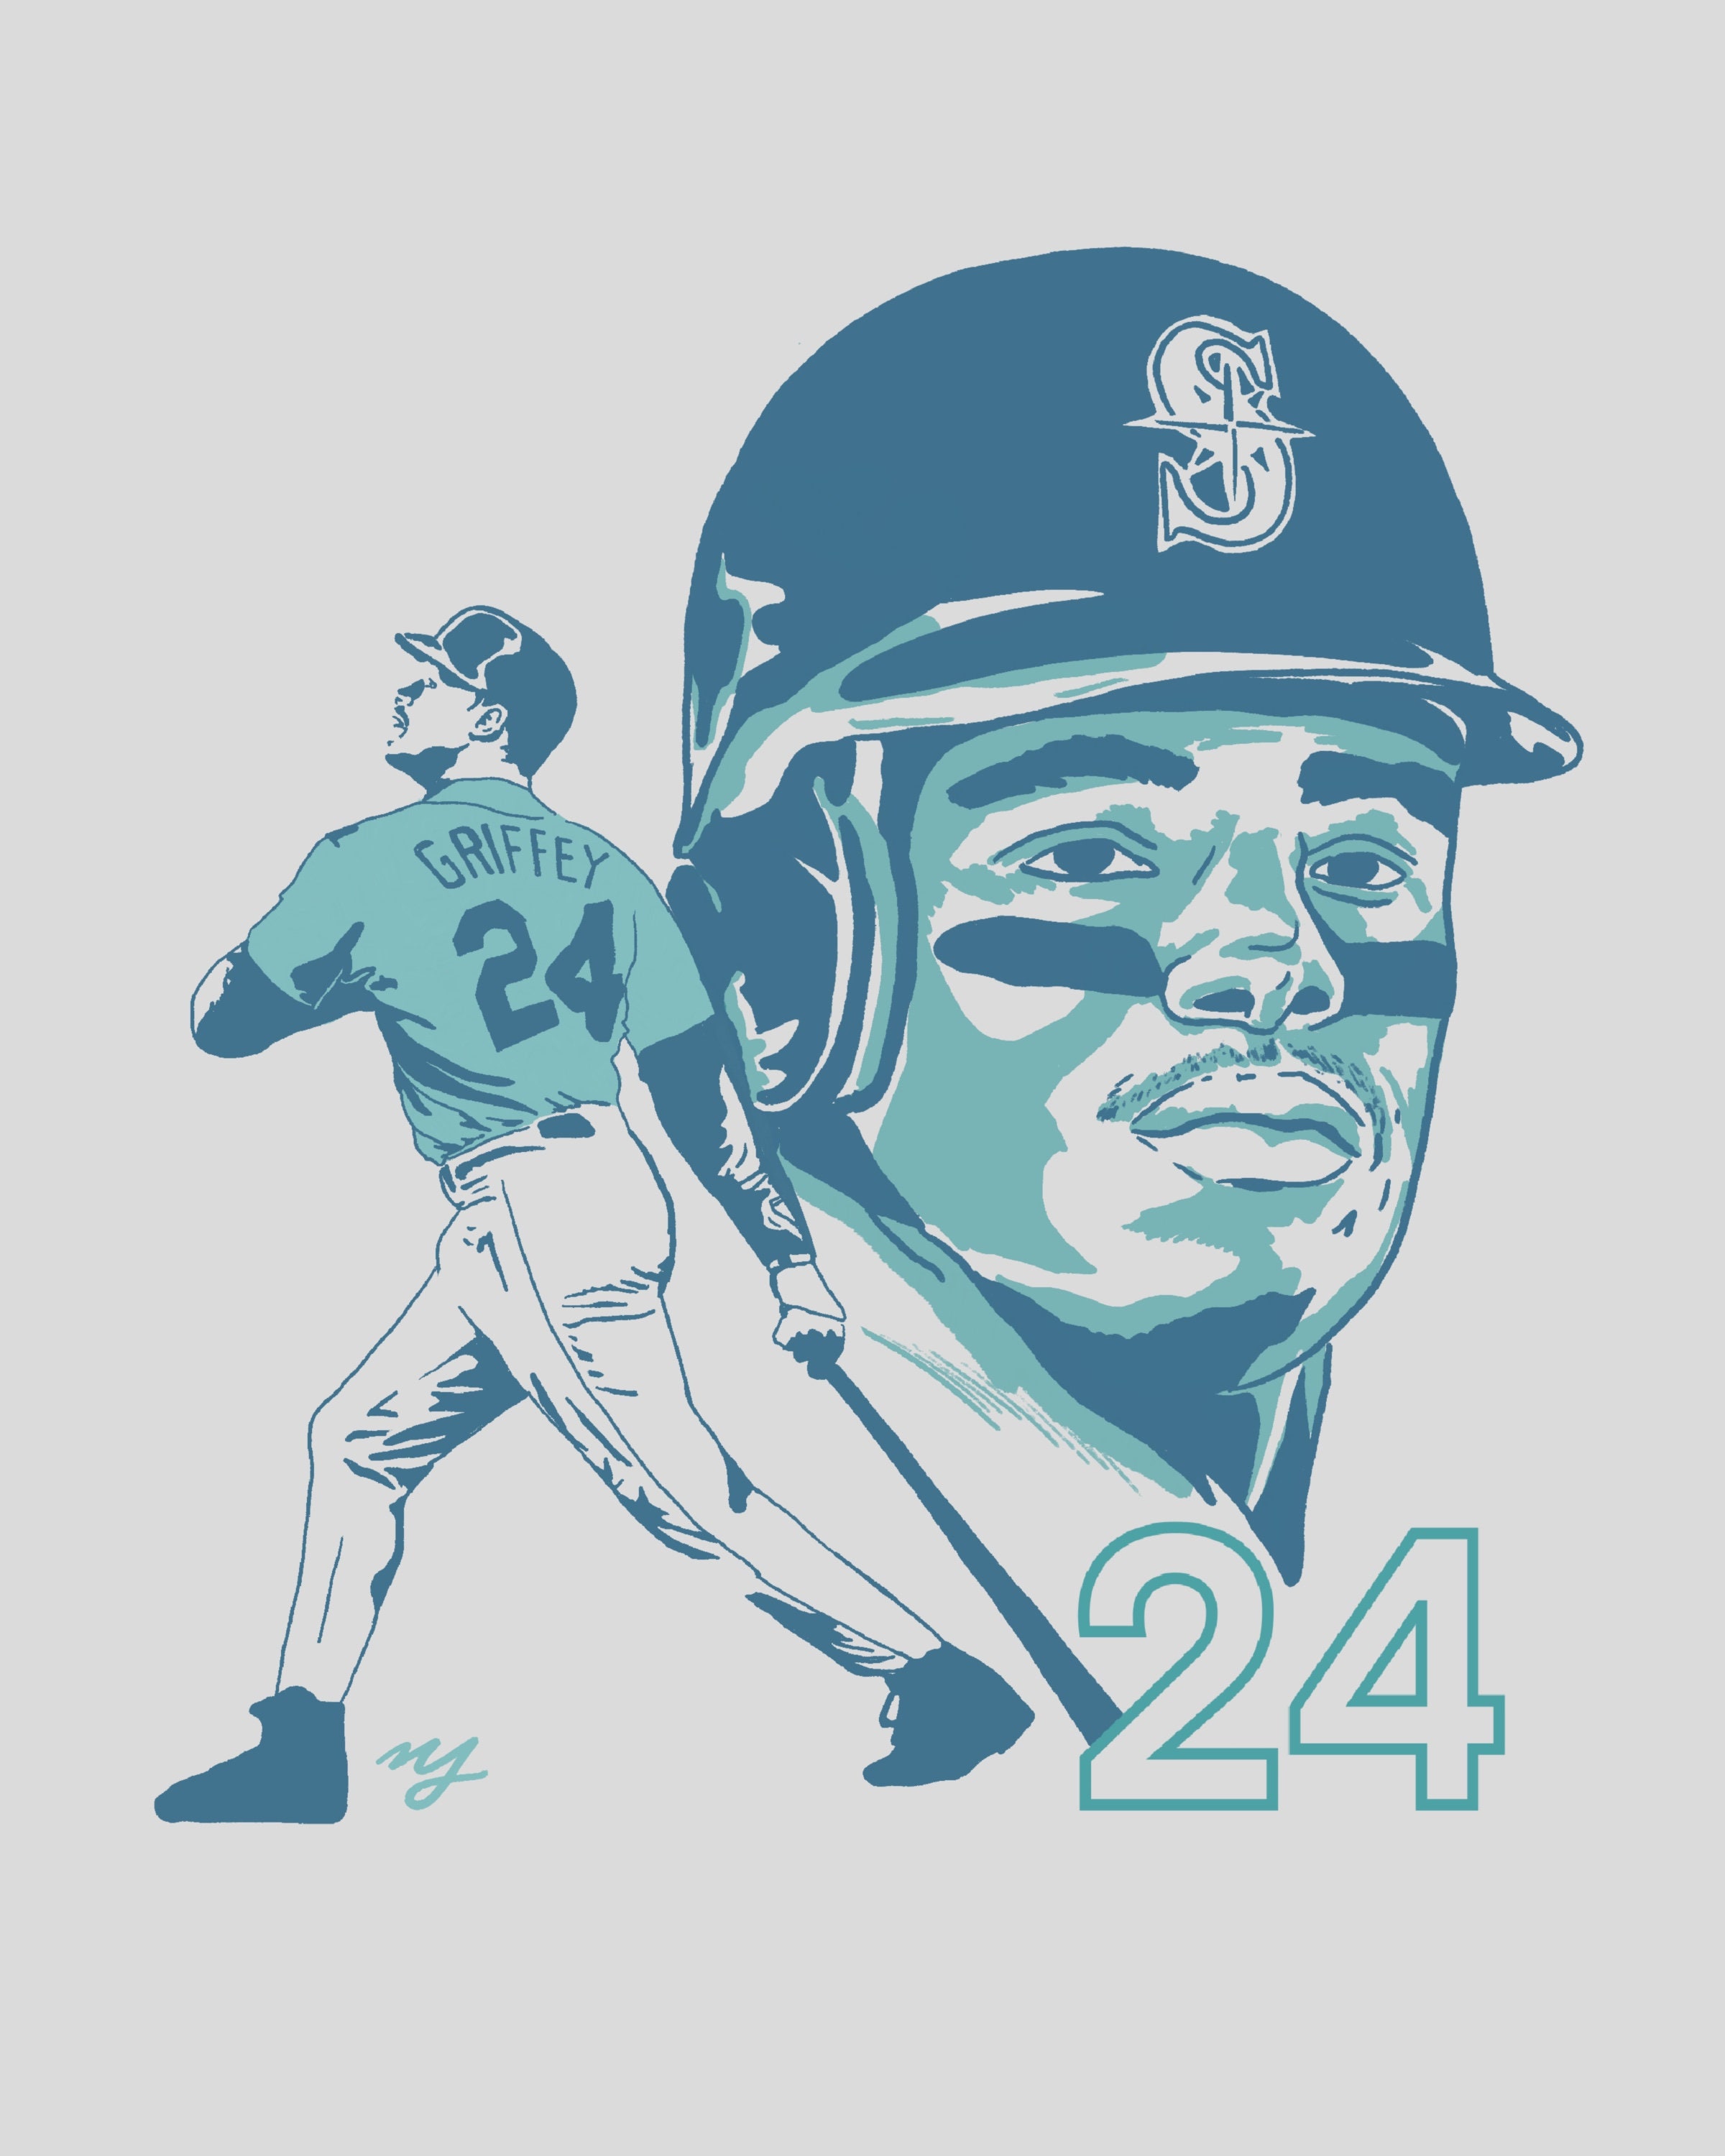 Buy Seattle Mariners Number 24 8X10 Giclee Print Online in India